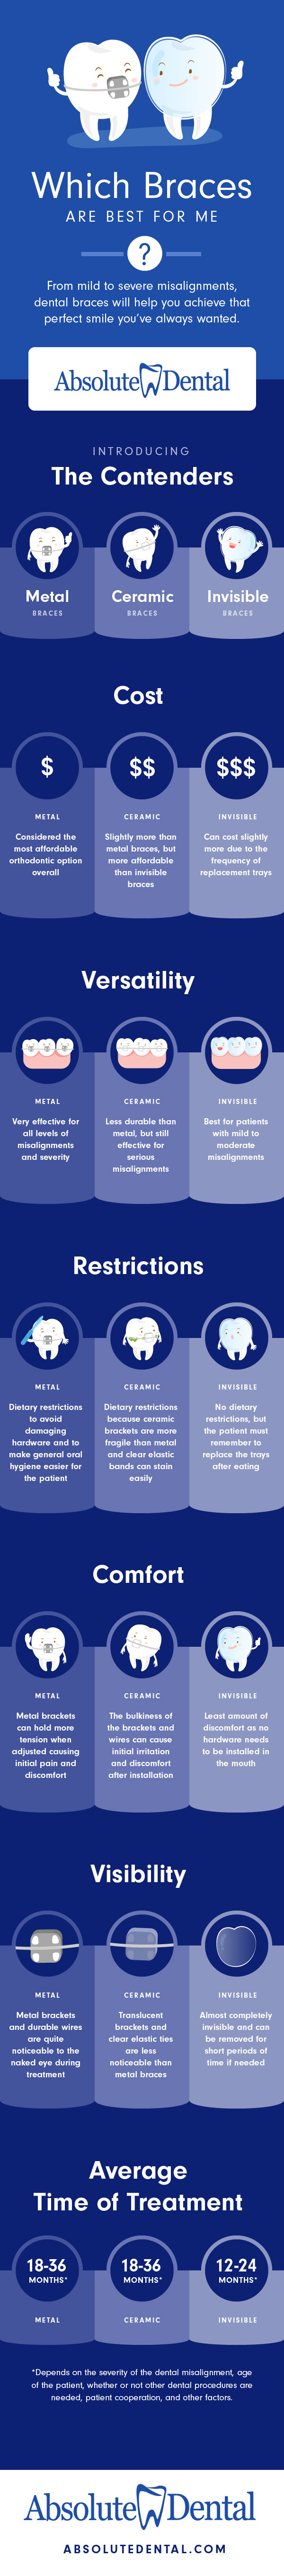 Which Braces Are Best For Me Infographic